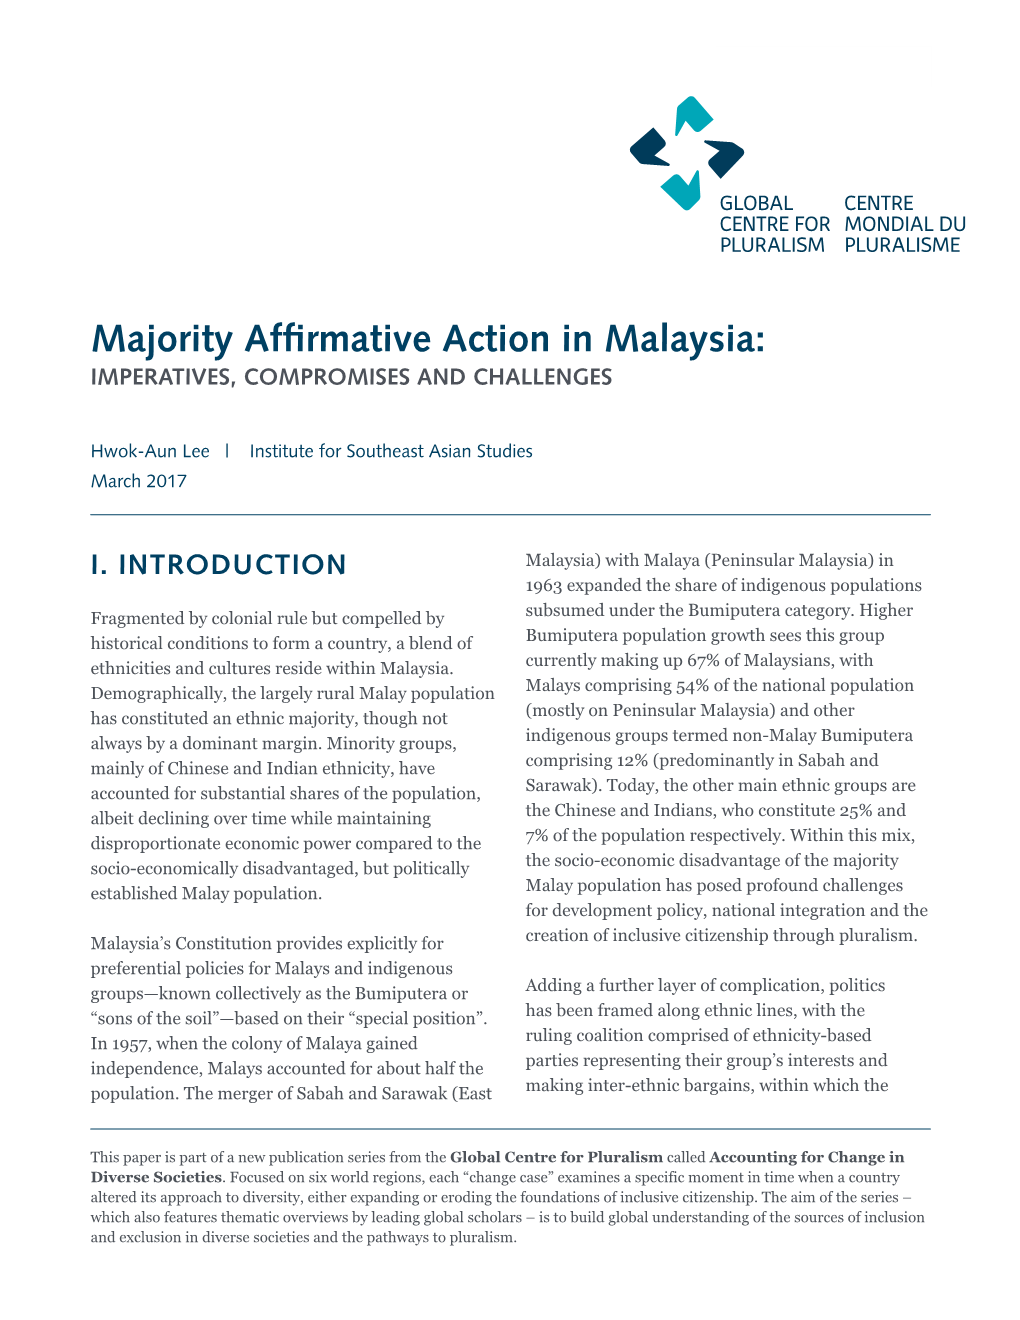 Majority Affirmative Action in Malaysia: IMPERATIVES, COMPROMISES and CHALLENGES